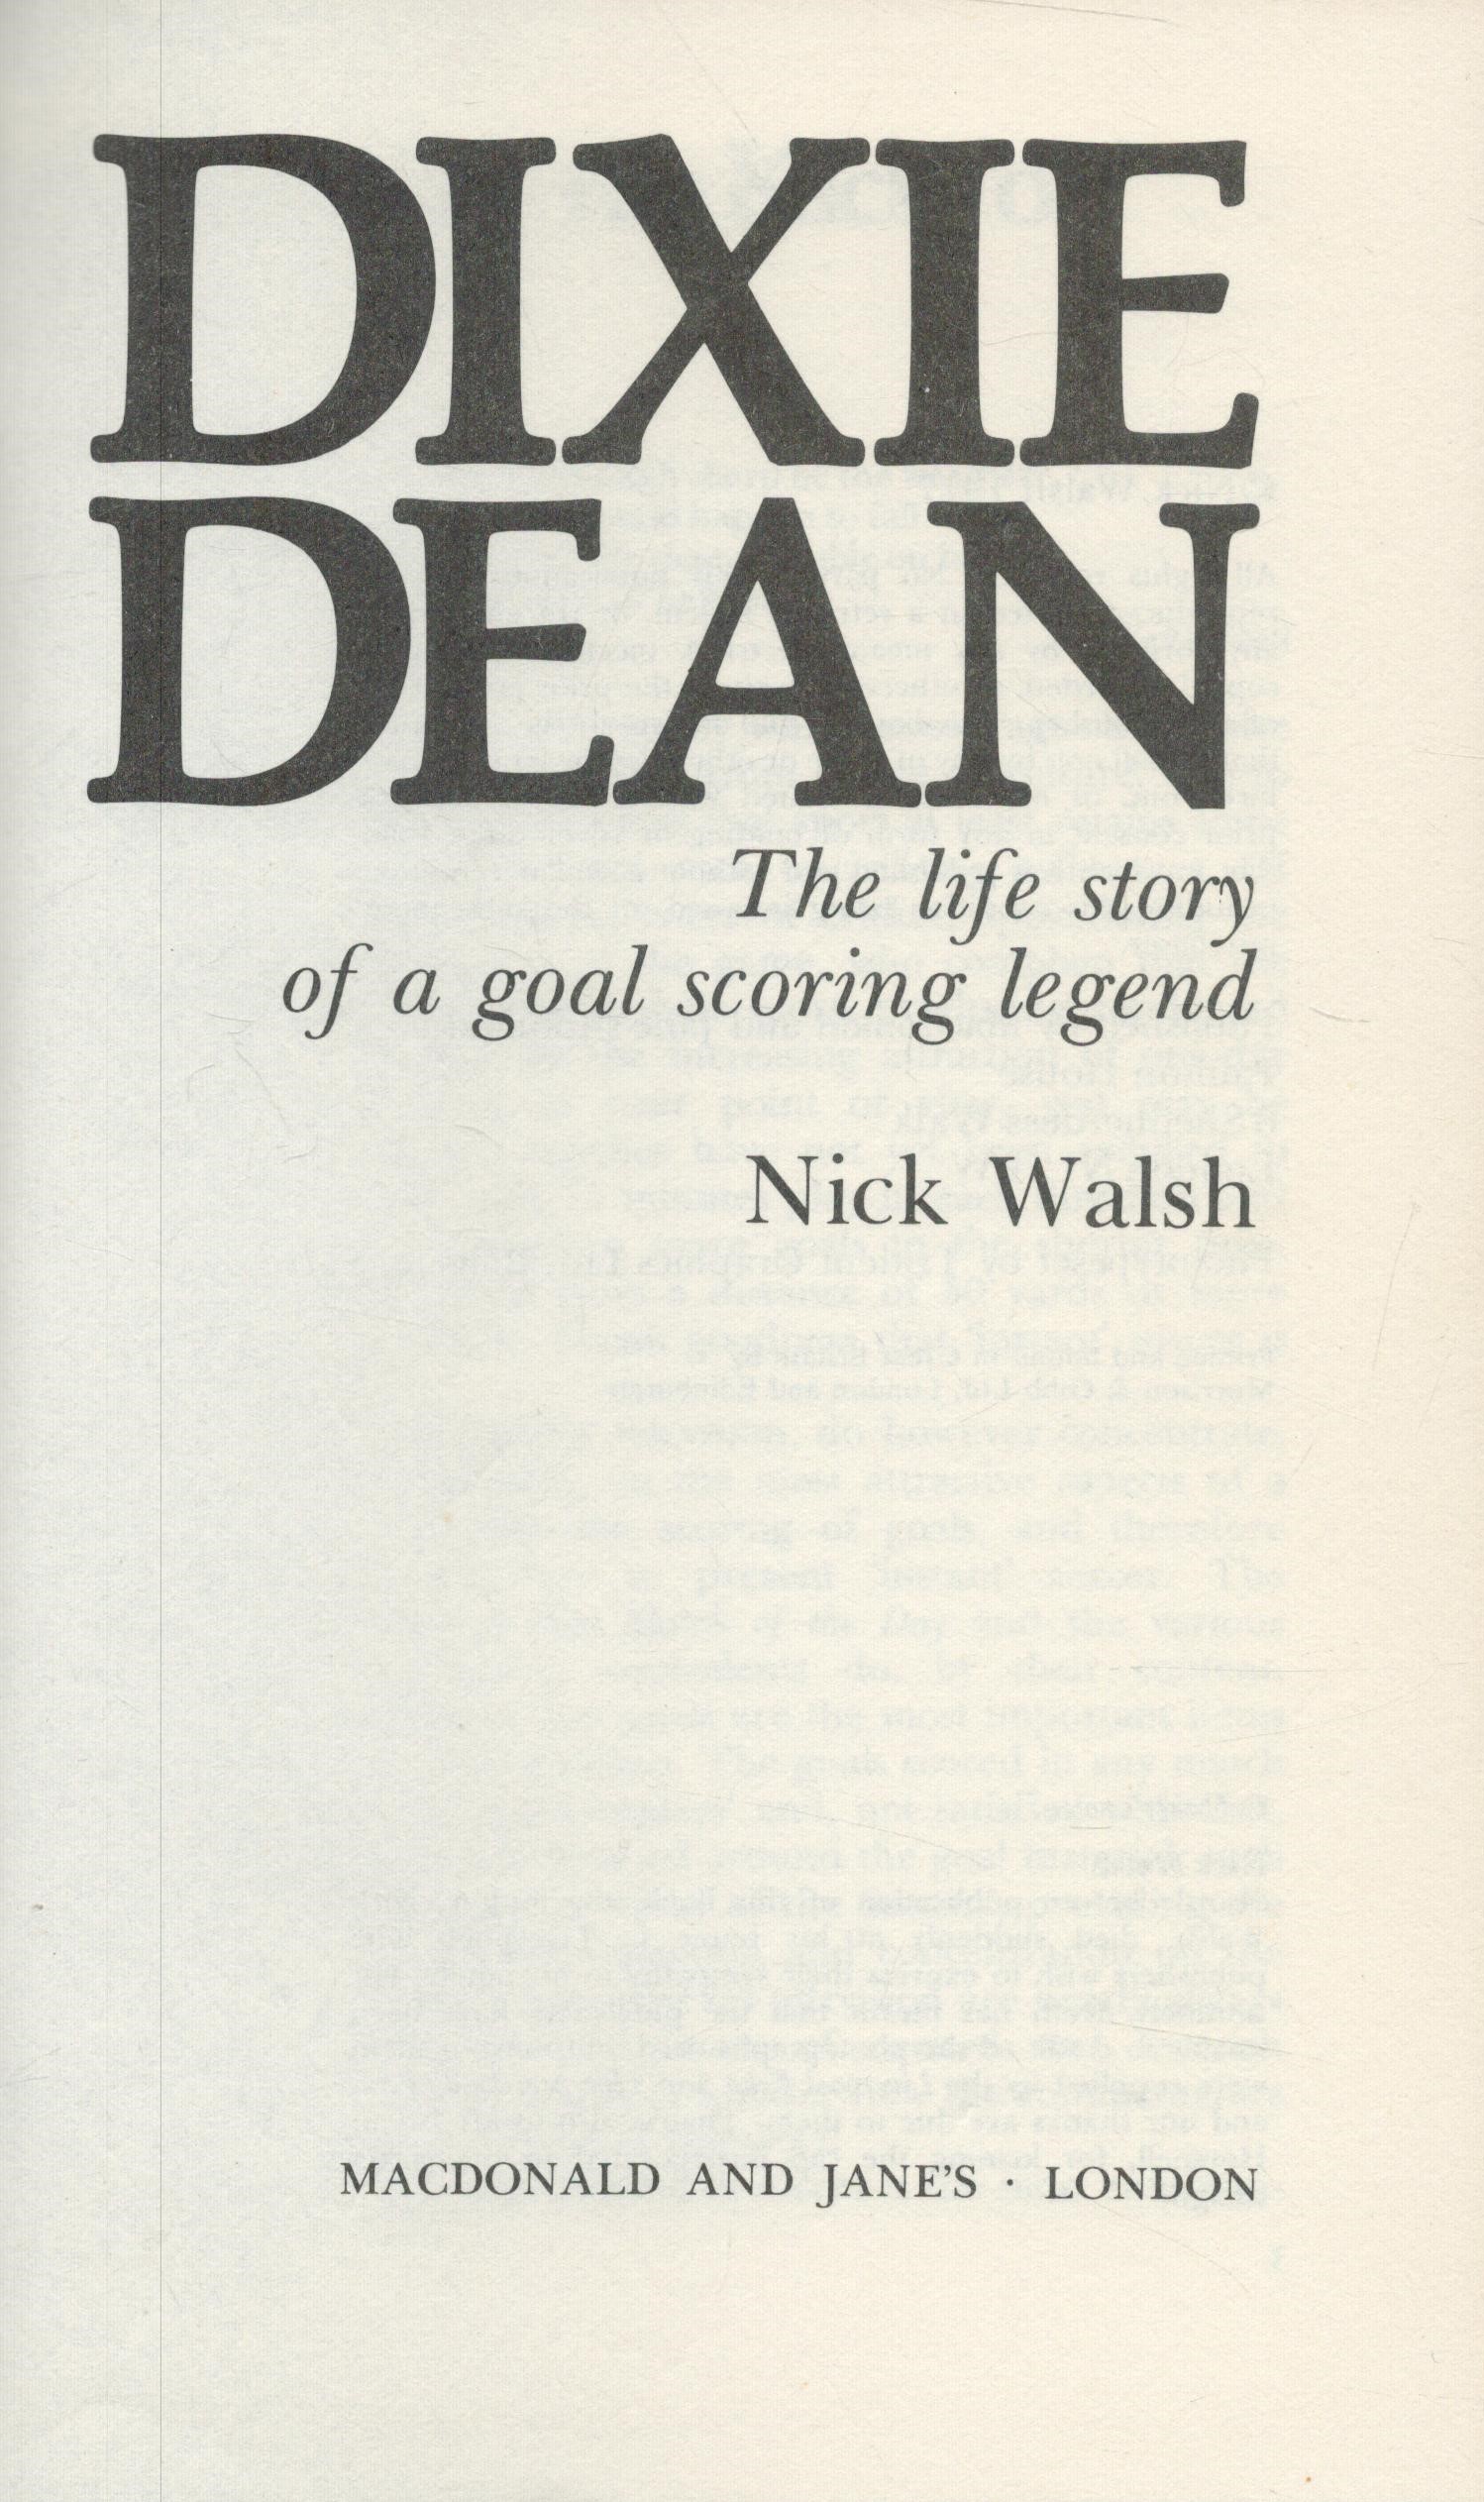 Dixie Dean signed Dixie Dean The Life Story Of A Goal Scoring Legend and 3 other signatures hardback - Image 3 of 4